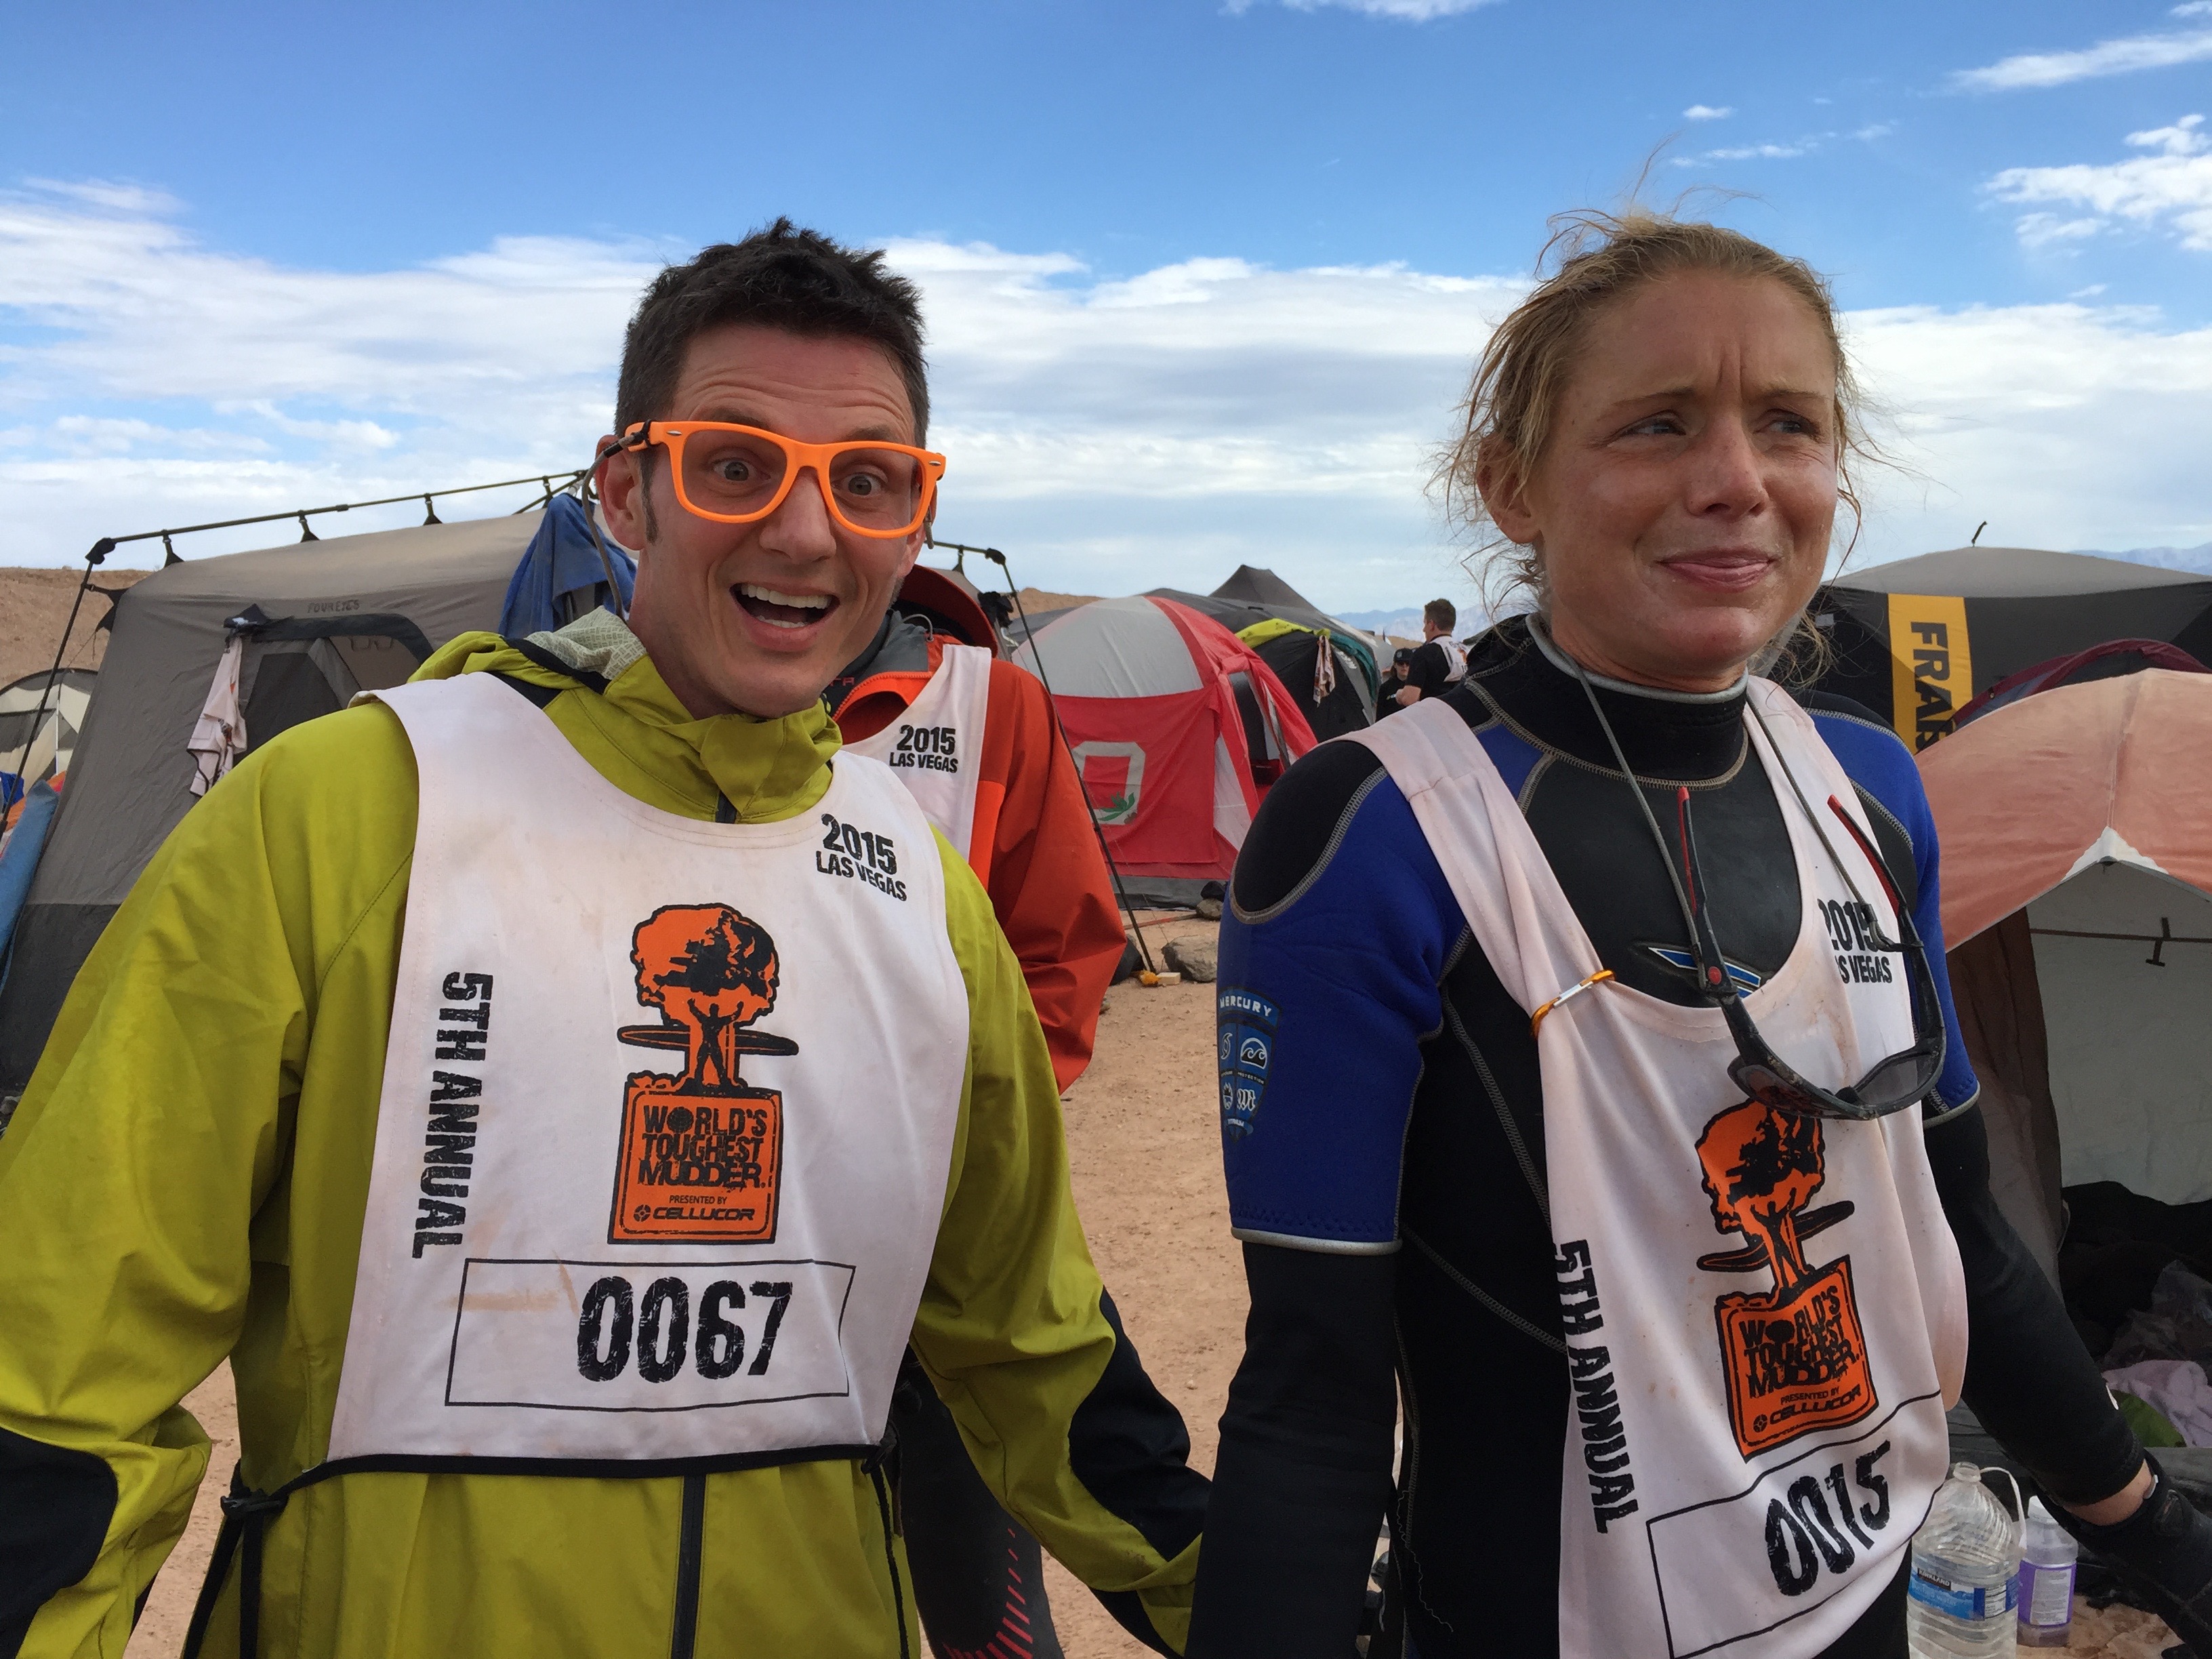 24 Moments From WTM 2015 Mud Run, OCR